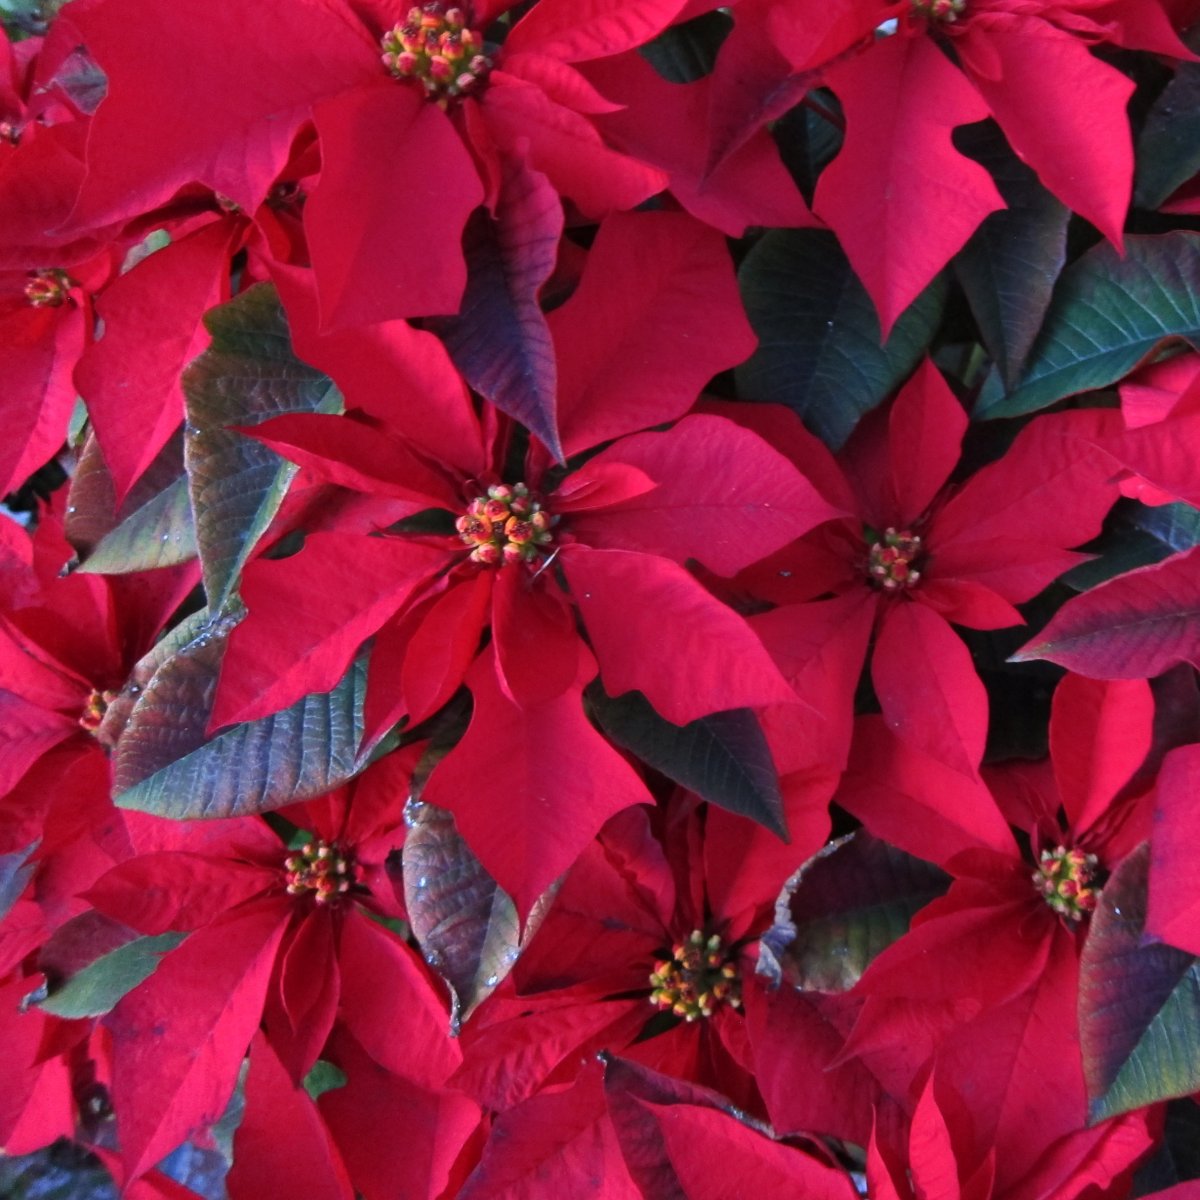 poinsettias-wont-kill-you-or-your-pets-though-you-still-shouldnt-eat-them-the-flowers-might-make-you-a-bit-sick-with-some-gastrointestinal-issues